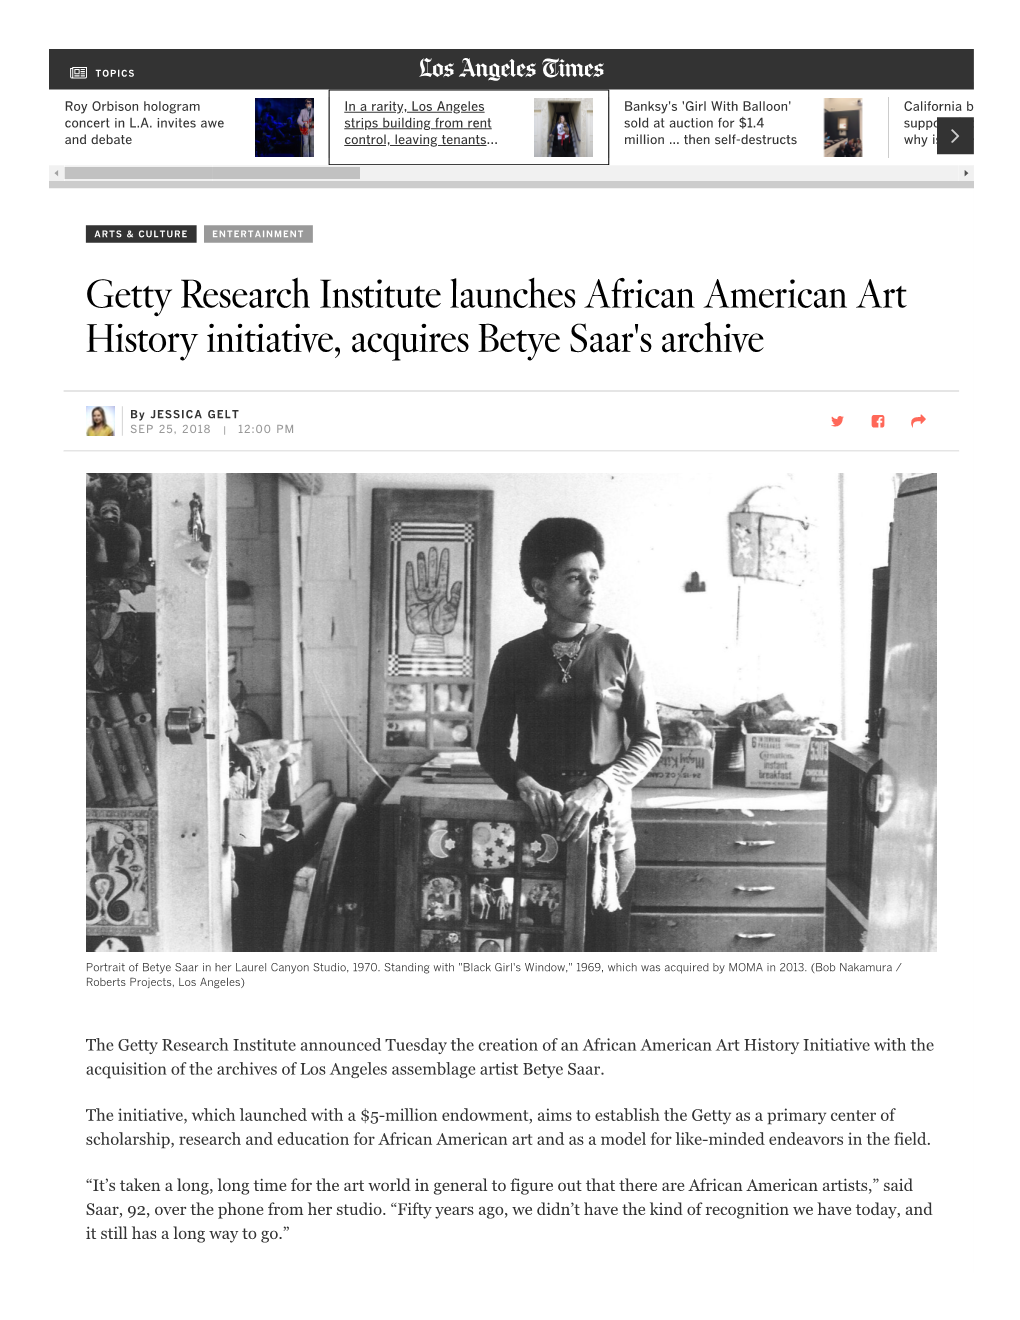 Getty Research Institute Launches African American Art History Initiative, Acquires Betye Saar's Archive